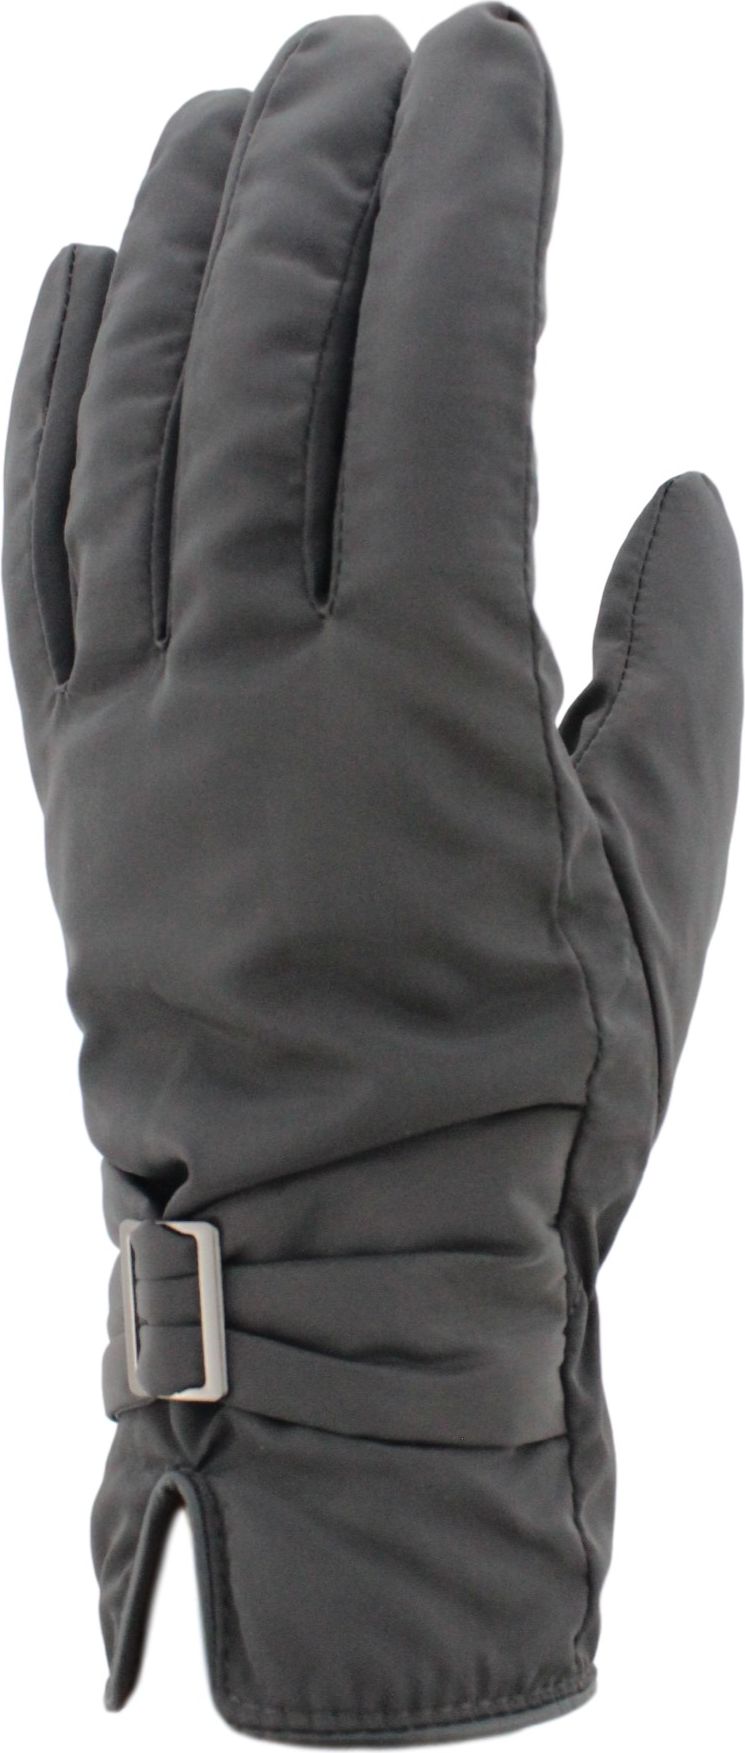 Sterling Glove Accessories Nylon Glove With Fiberfill And Buckle Grey